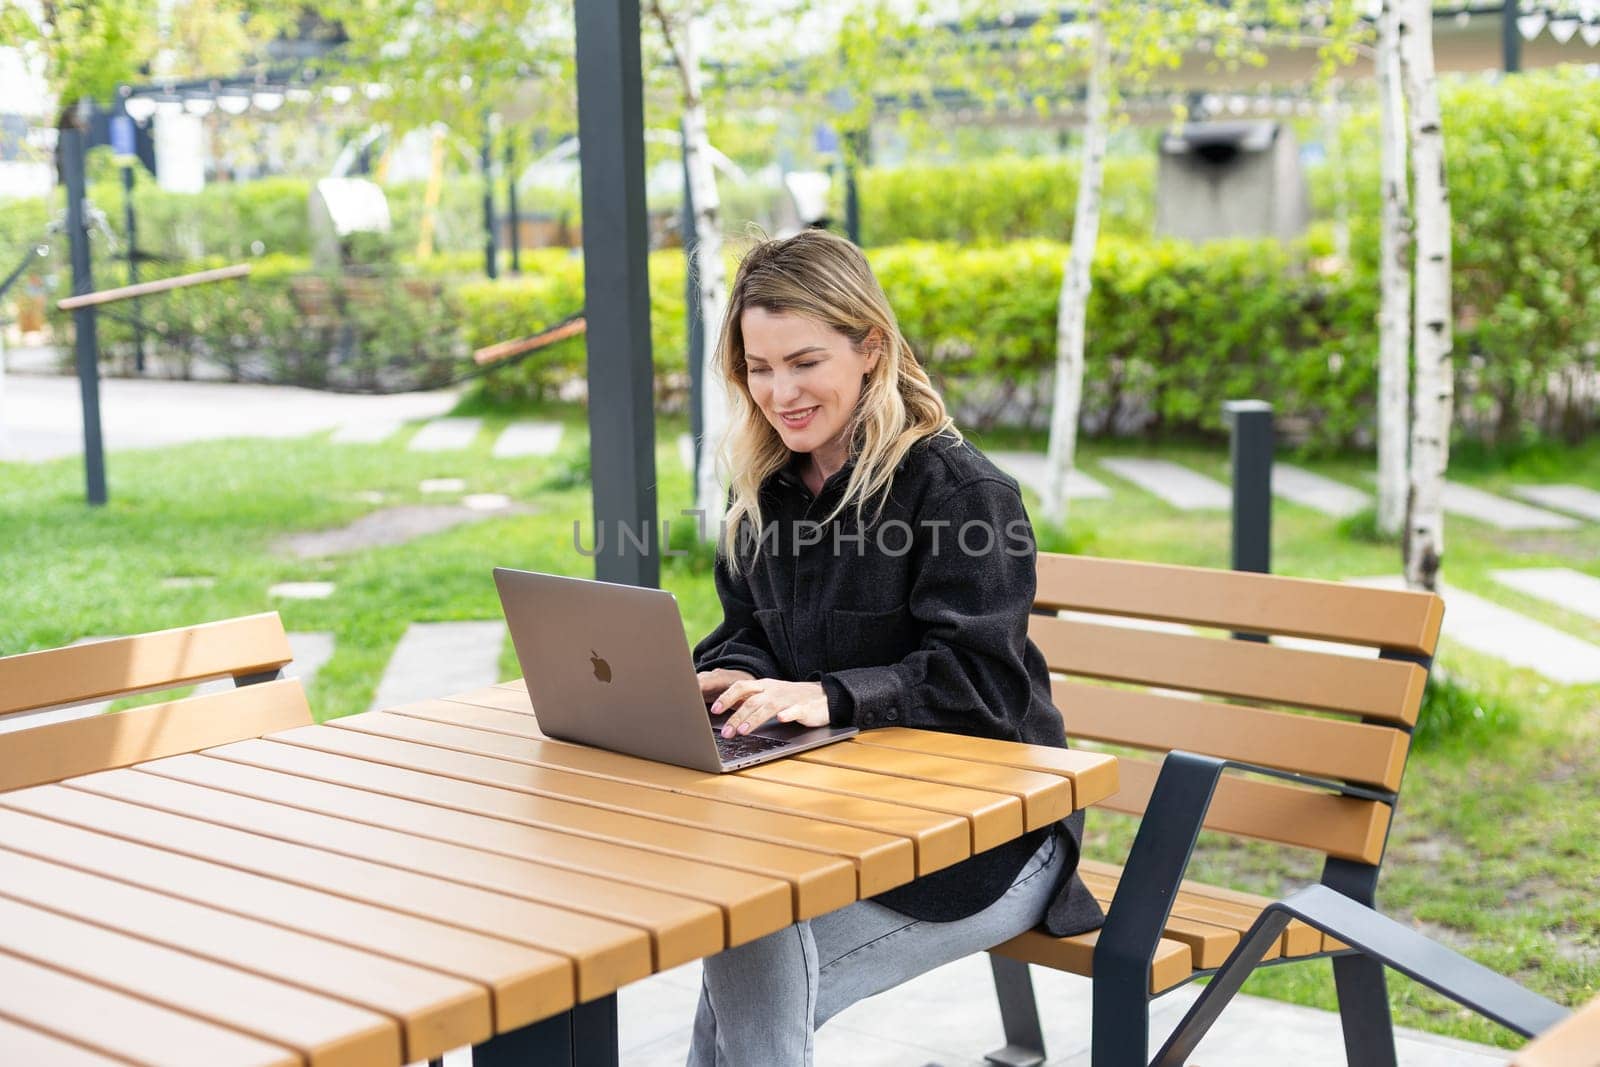 girl with a laptop on a bench in the park on a background of greenery by Andelov13